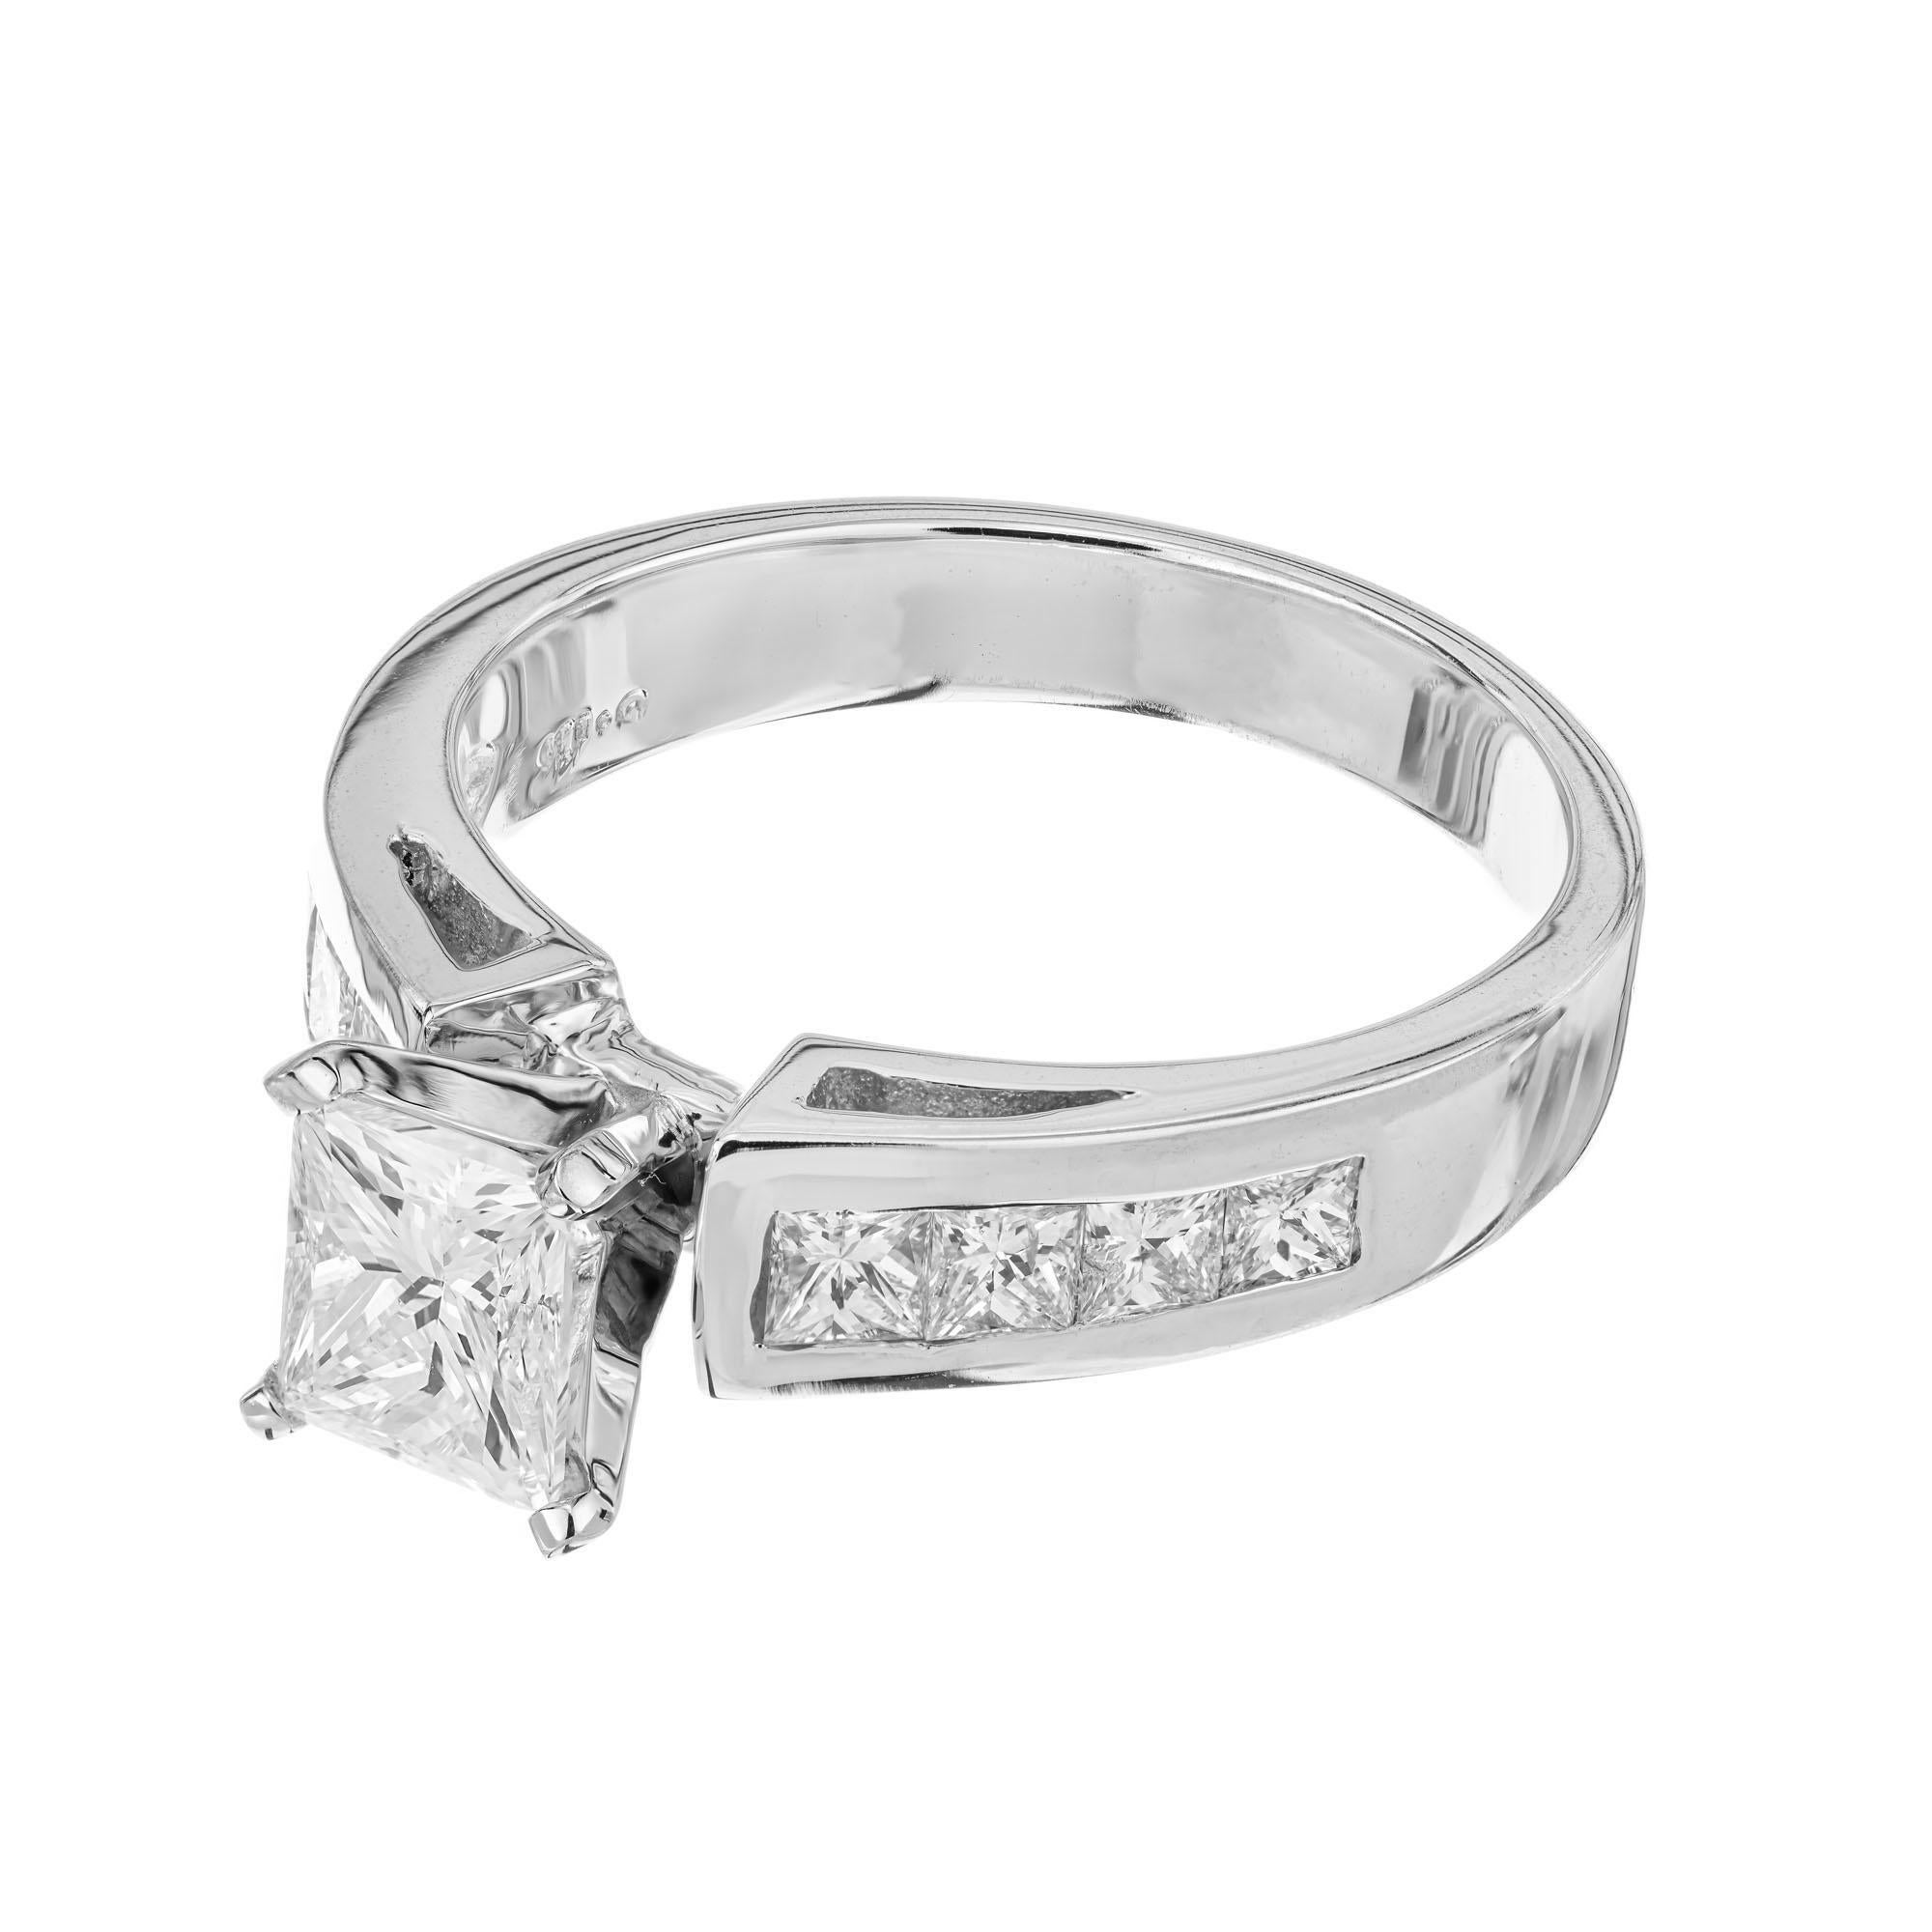 Princess Cut GIA Certified 1.28 Carat Diamond White Gold Engagement Ring For Sale